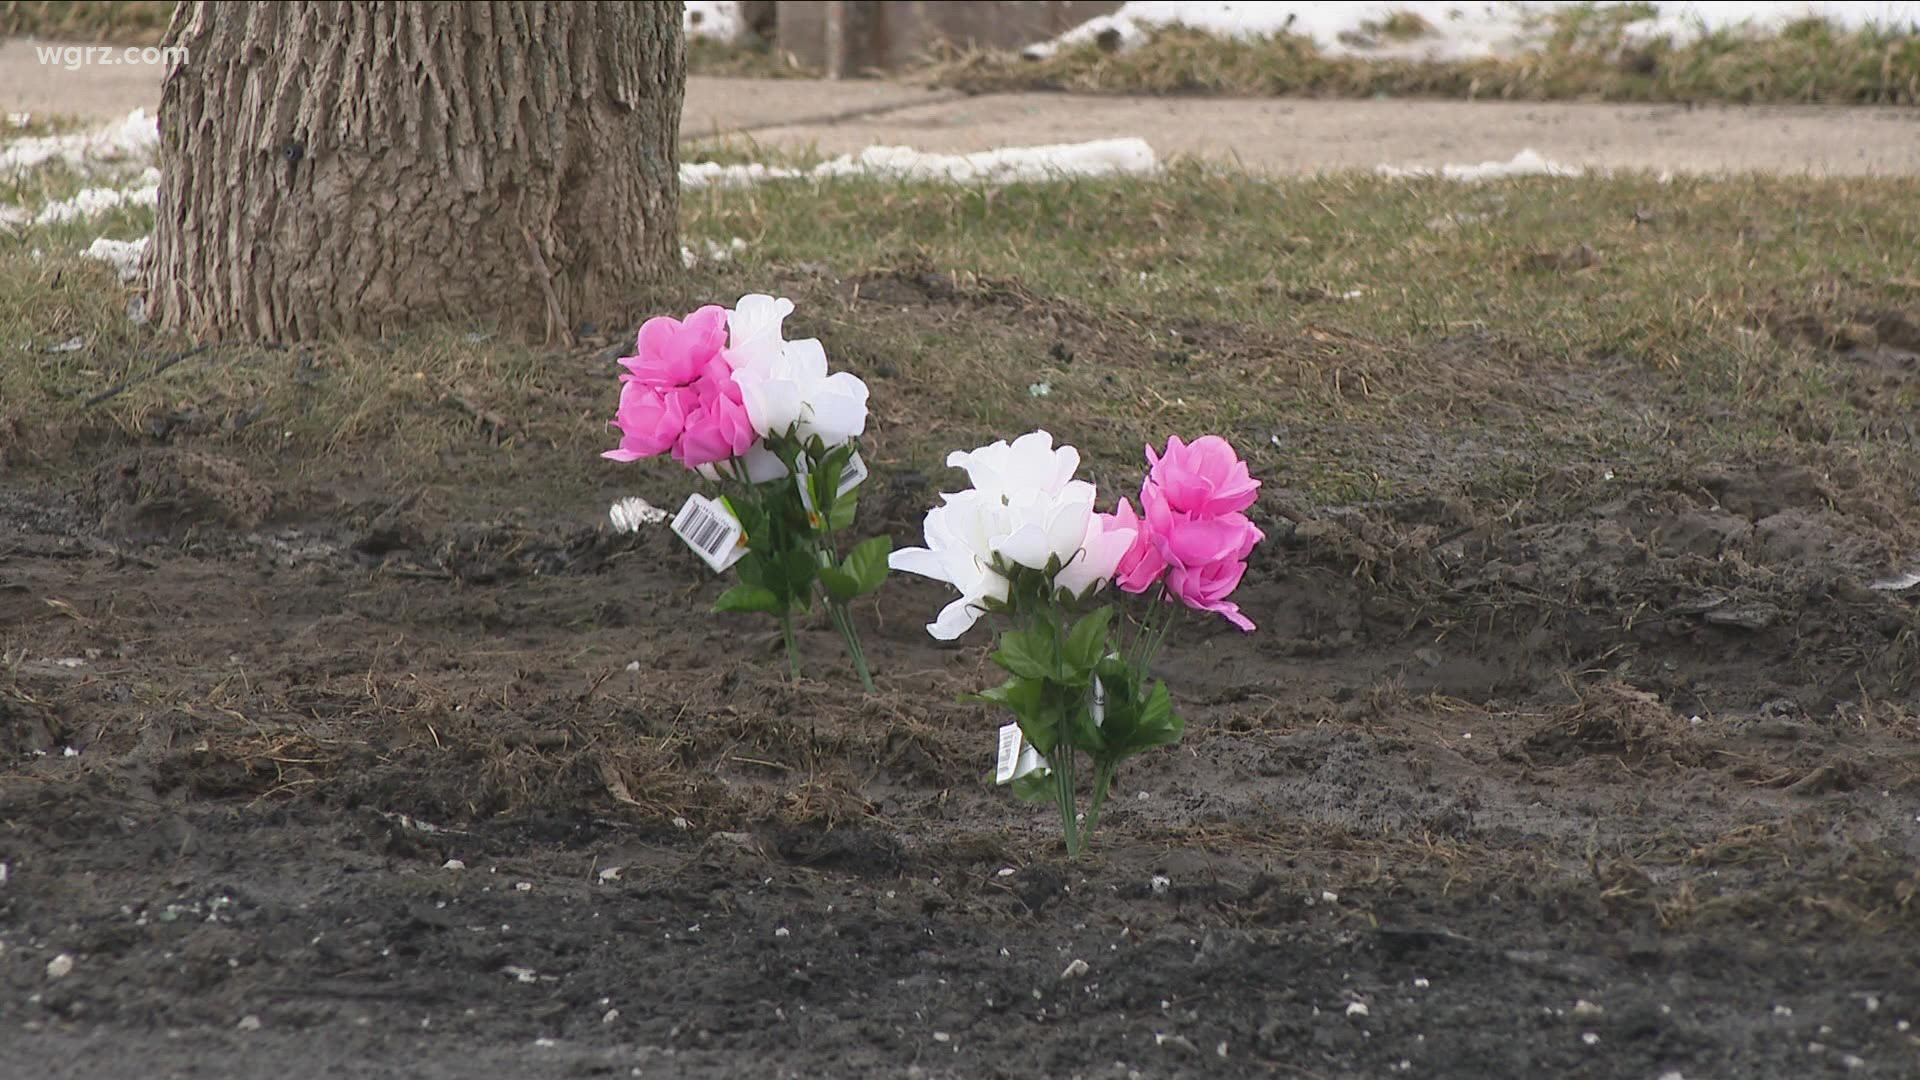 Friends, family and the community are mourning the loss of two teenagers who tragically died in a crash along Warner Road. A third victim is in critical condition.